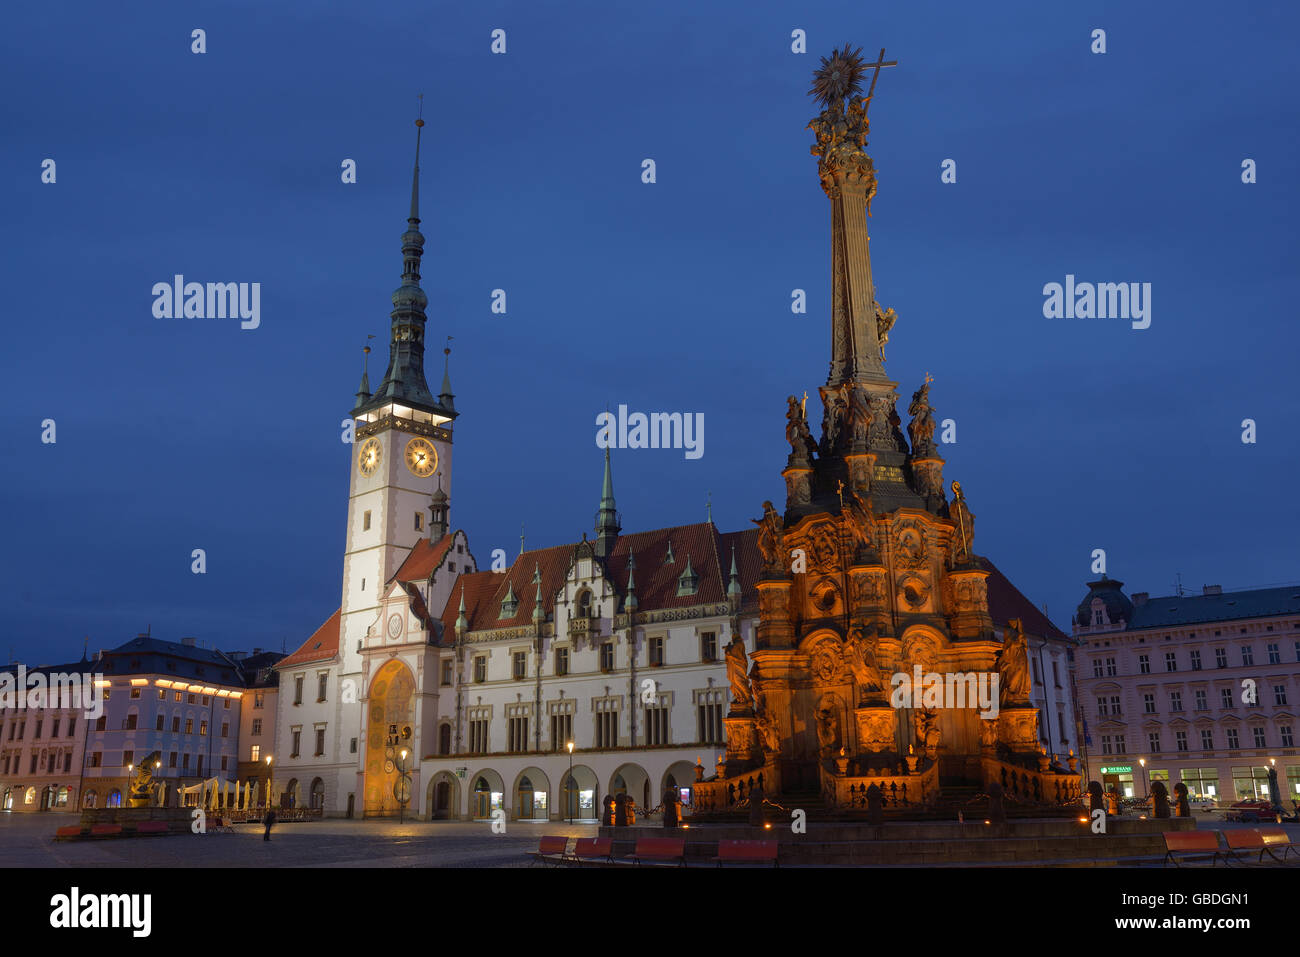 Holy Trinity column and the town hall of Olomouc at night. Moravia, Czech Republic. Stock Photo